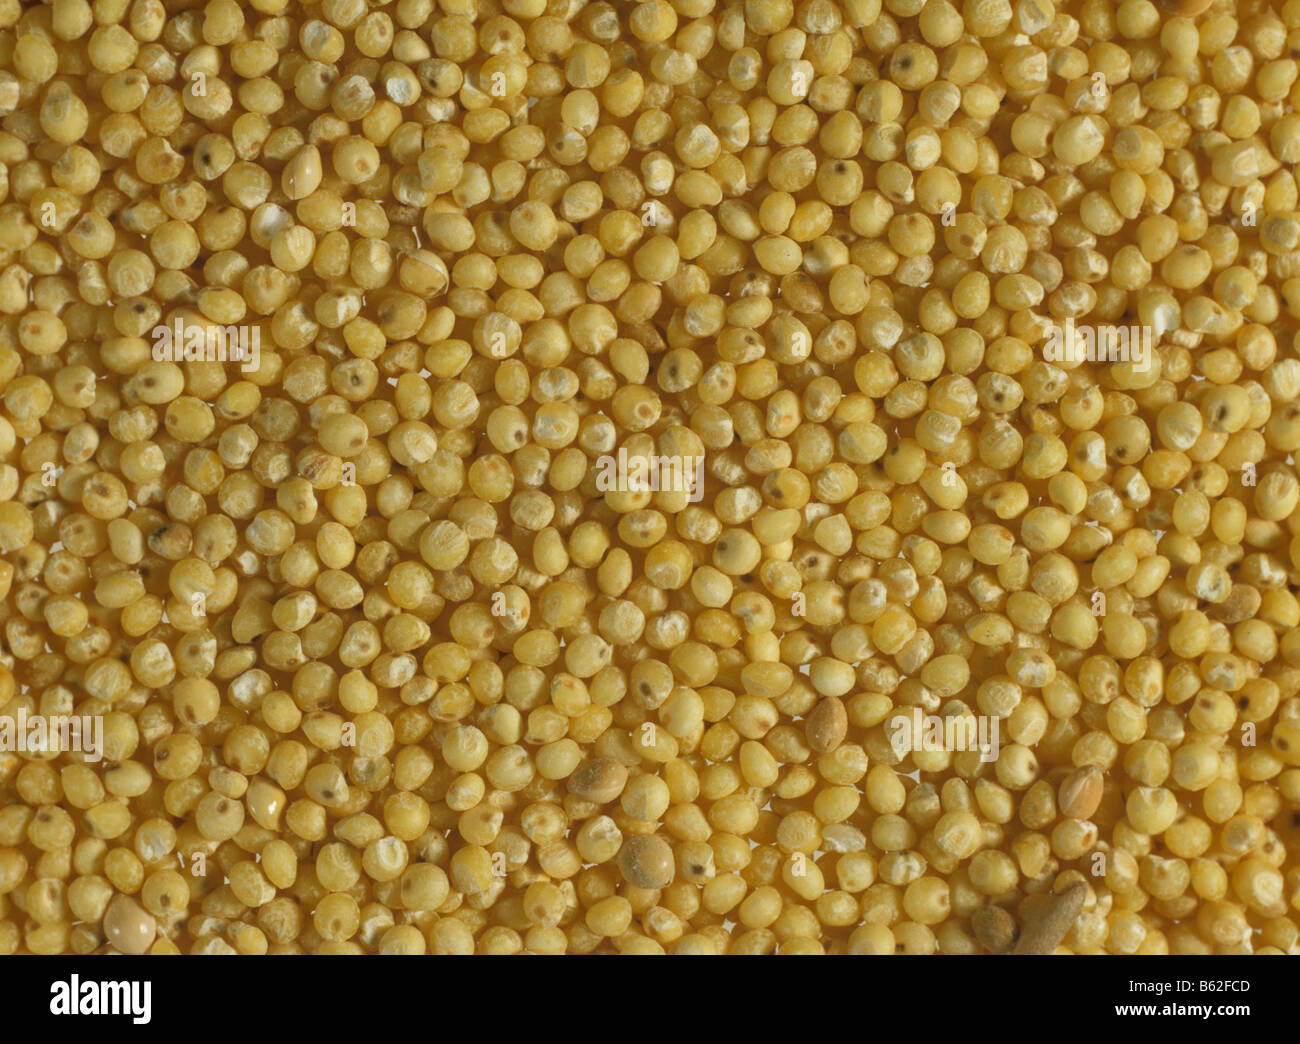 Finger millet seed Eleusine coracana from a health shop Stock Photo